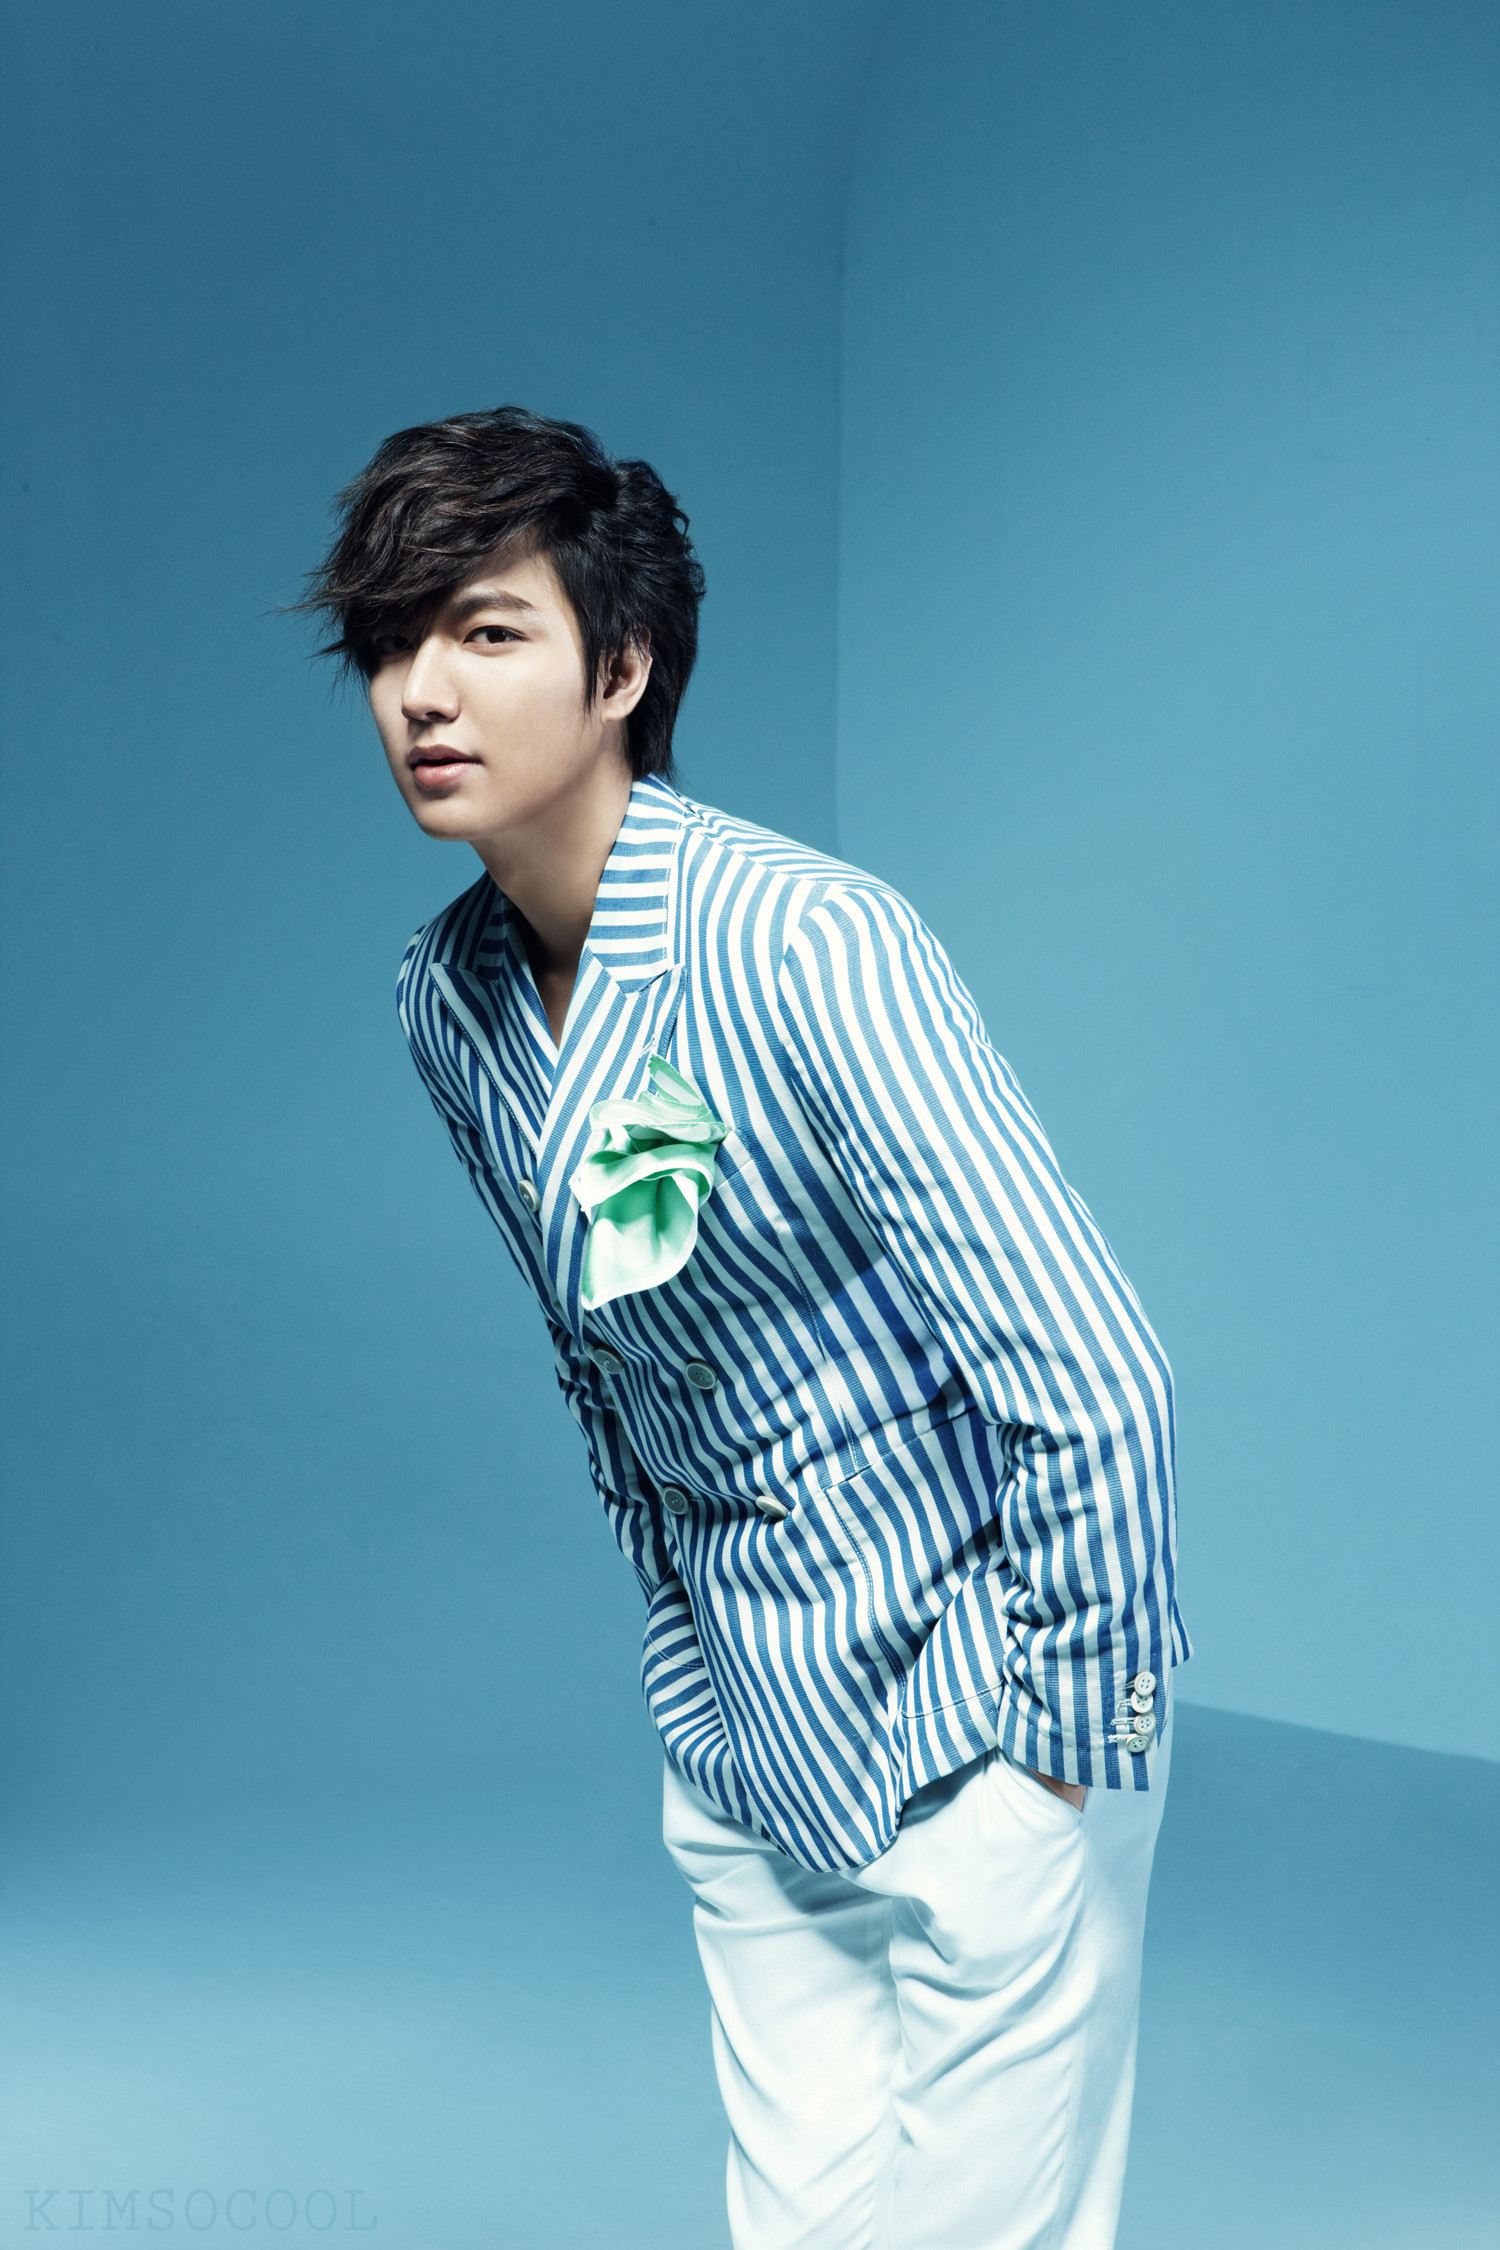 lee min ho wallpaper,hair,clothing,hairstyle,fashion model,cool